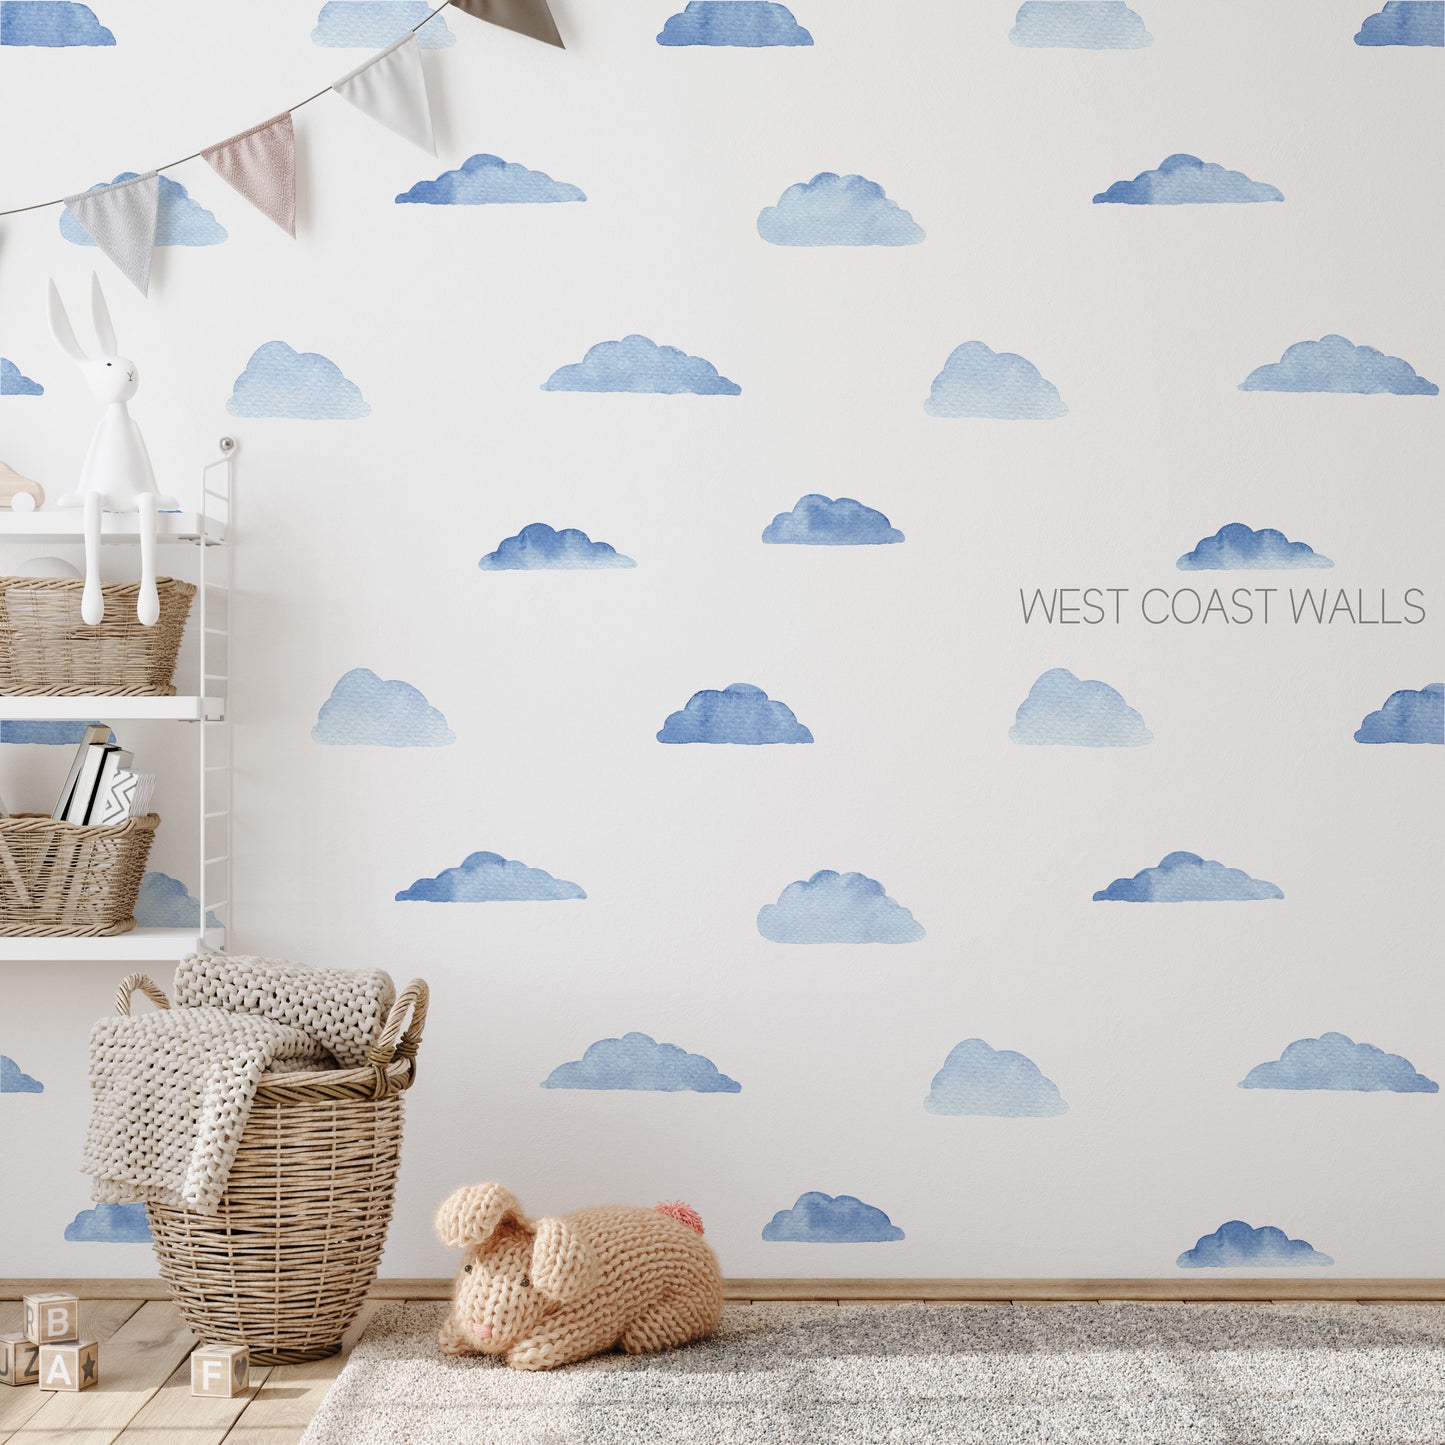 Watercolor Cloud Removable Wall Decals  / Nursery Decals / Cloud Room / Oh the Places You'll Go / Nursery Decor / Watercolor Decals